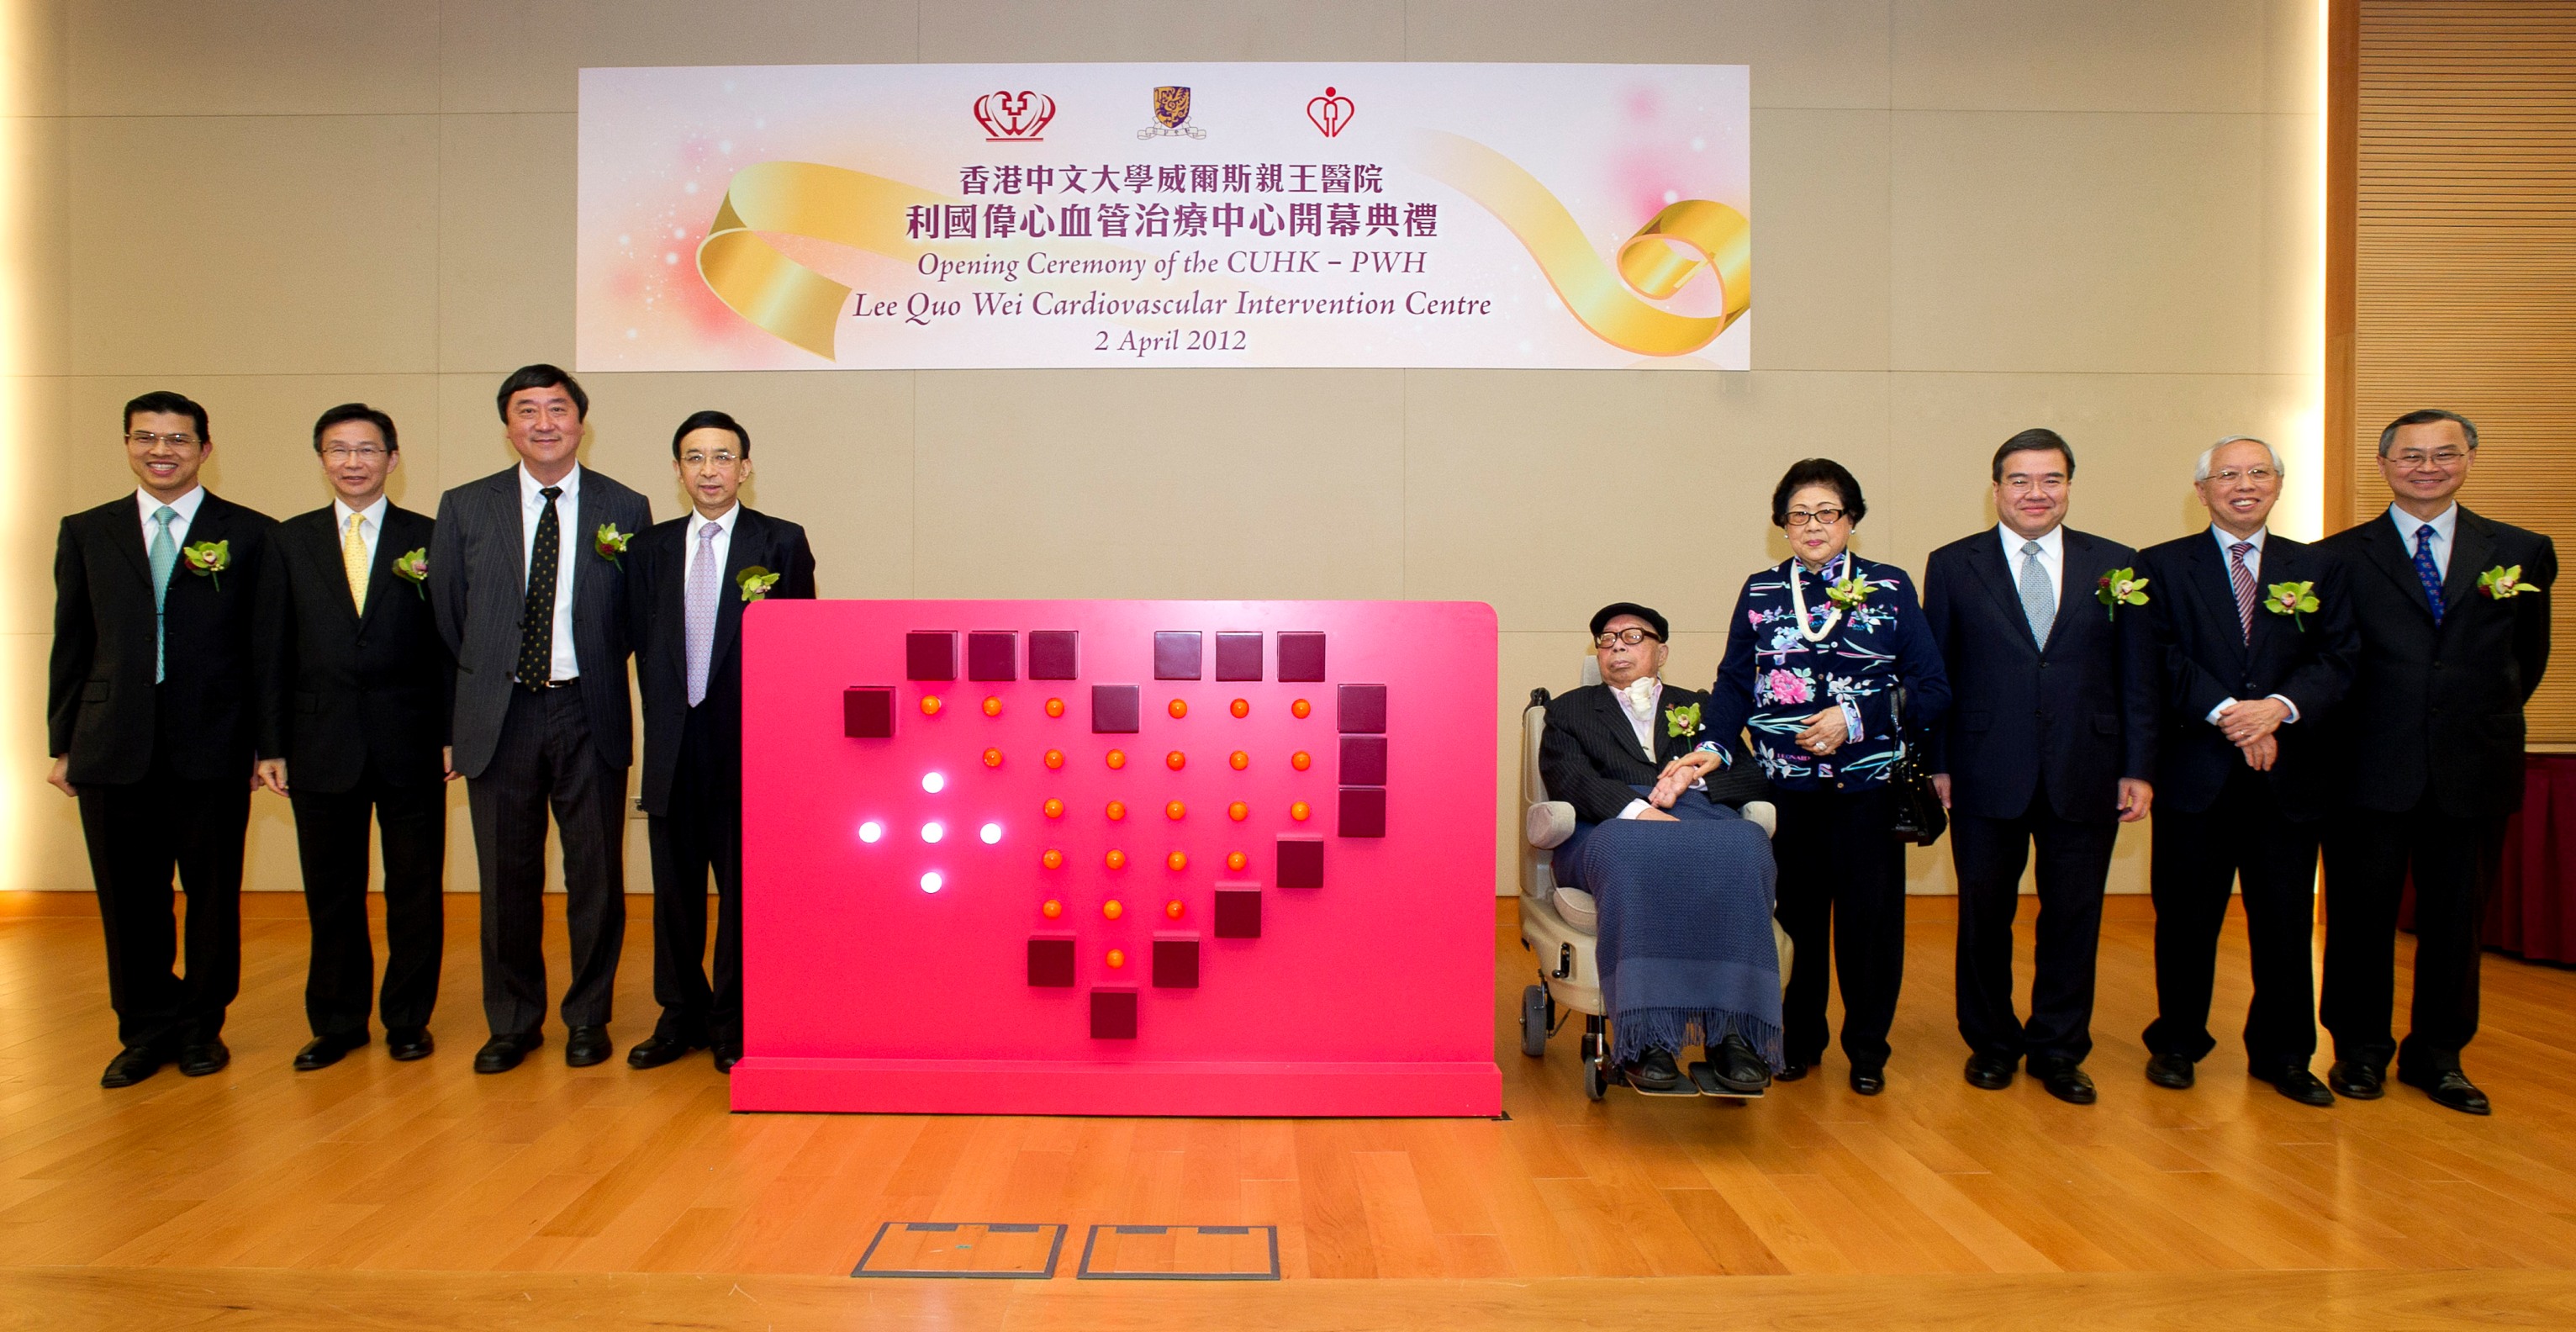 (From left) Prof. Yu Cheuk-man, Chairman of the Department of Medicine and Therapeutics, Faculty of Medicine, CUHK, and Director of the Lee Quo Wei Cardiovascular Intervention Centre; Dr. Fung Hong, Cluster Chief Executive, New Territories East Cluster; Prof. Joseph Sung, Vice-Chancellor and President, CUHK; Dr. Vincent Cheng, Chairman of the Council, CUHK; Dr. the Honorable Lee Quo-wei, Chairman of the Wei Lun Foundation Limited and Former Chairman and Life Member of the Council, CUHK, and Mrs. Lee; Mr. Anthony Wu, Chairman of the Hospital Authority; Mr. Edward Ho, Chairman of the Hospital Governing Committee, Prince of Wales Hospital; and Prof. Fok Tai-fai, Dean, Faculty of Medicine, CUHK, officiate at the Opening Ceremony of the CUHK-PWH Lee Quo Wei Cardiovascular Intervention Centre